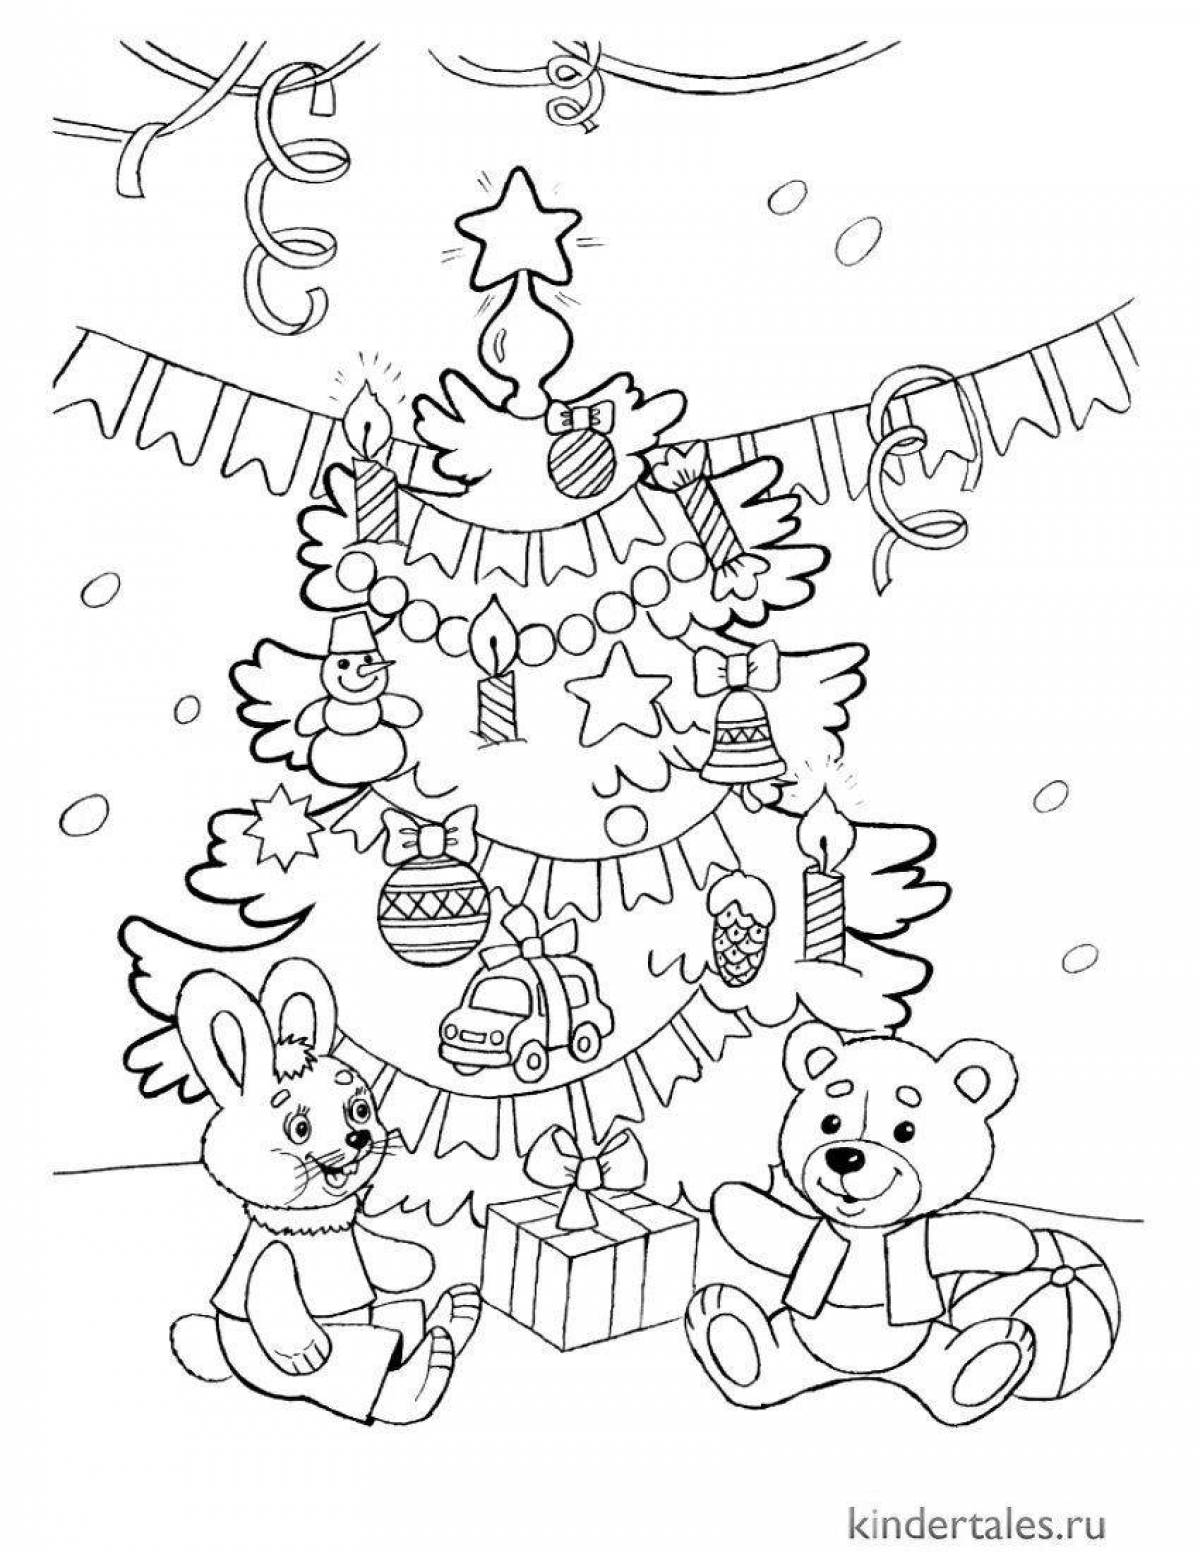 A wonderful Christmas coloring book for children 6-7 years old